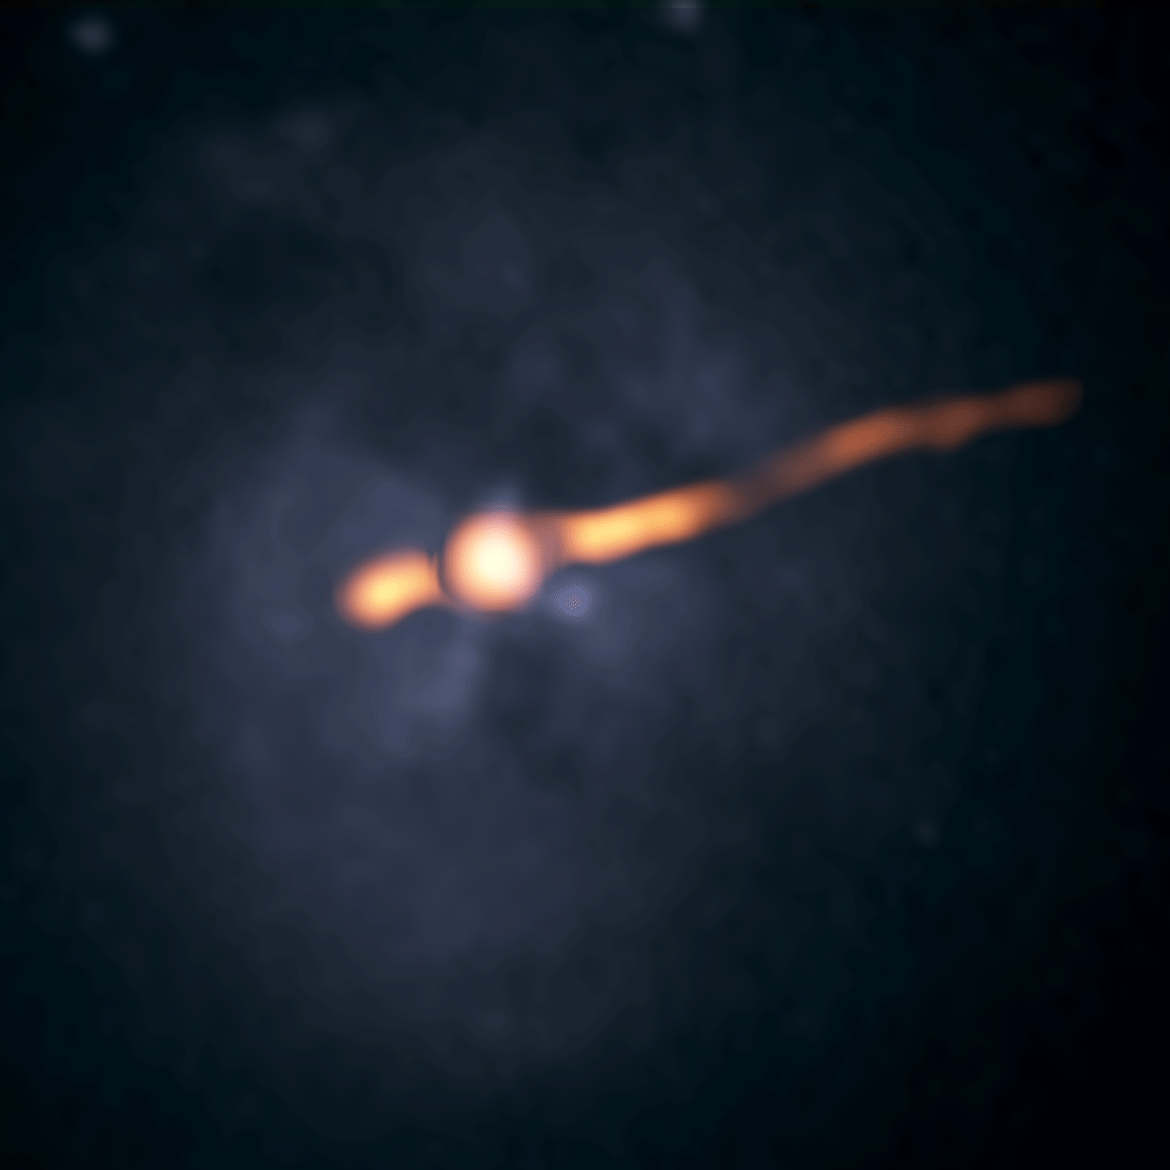 This GIF shows VLA radio images (orange) of the central region of the galaxy Cygnus A from 1989 and 2015, overlaid on a Hubble Space Telescope photo.